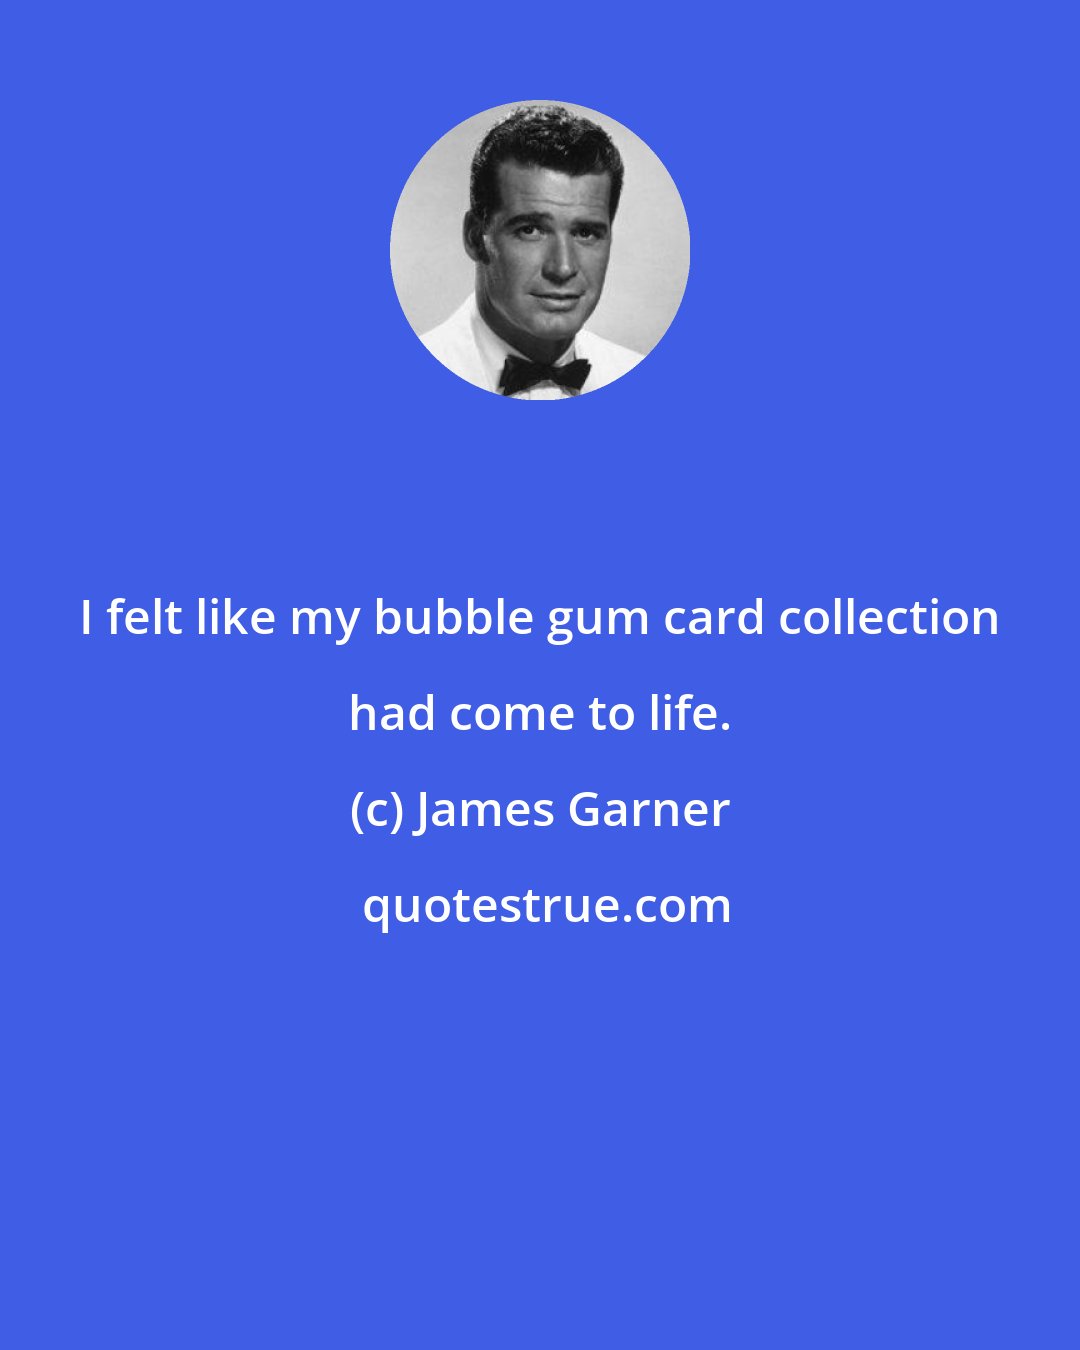 James Garner: I felt like my bubble gum card collection had come to life.